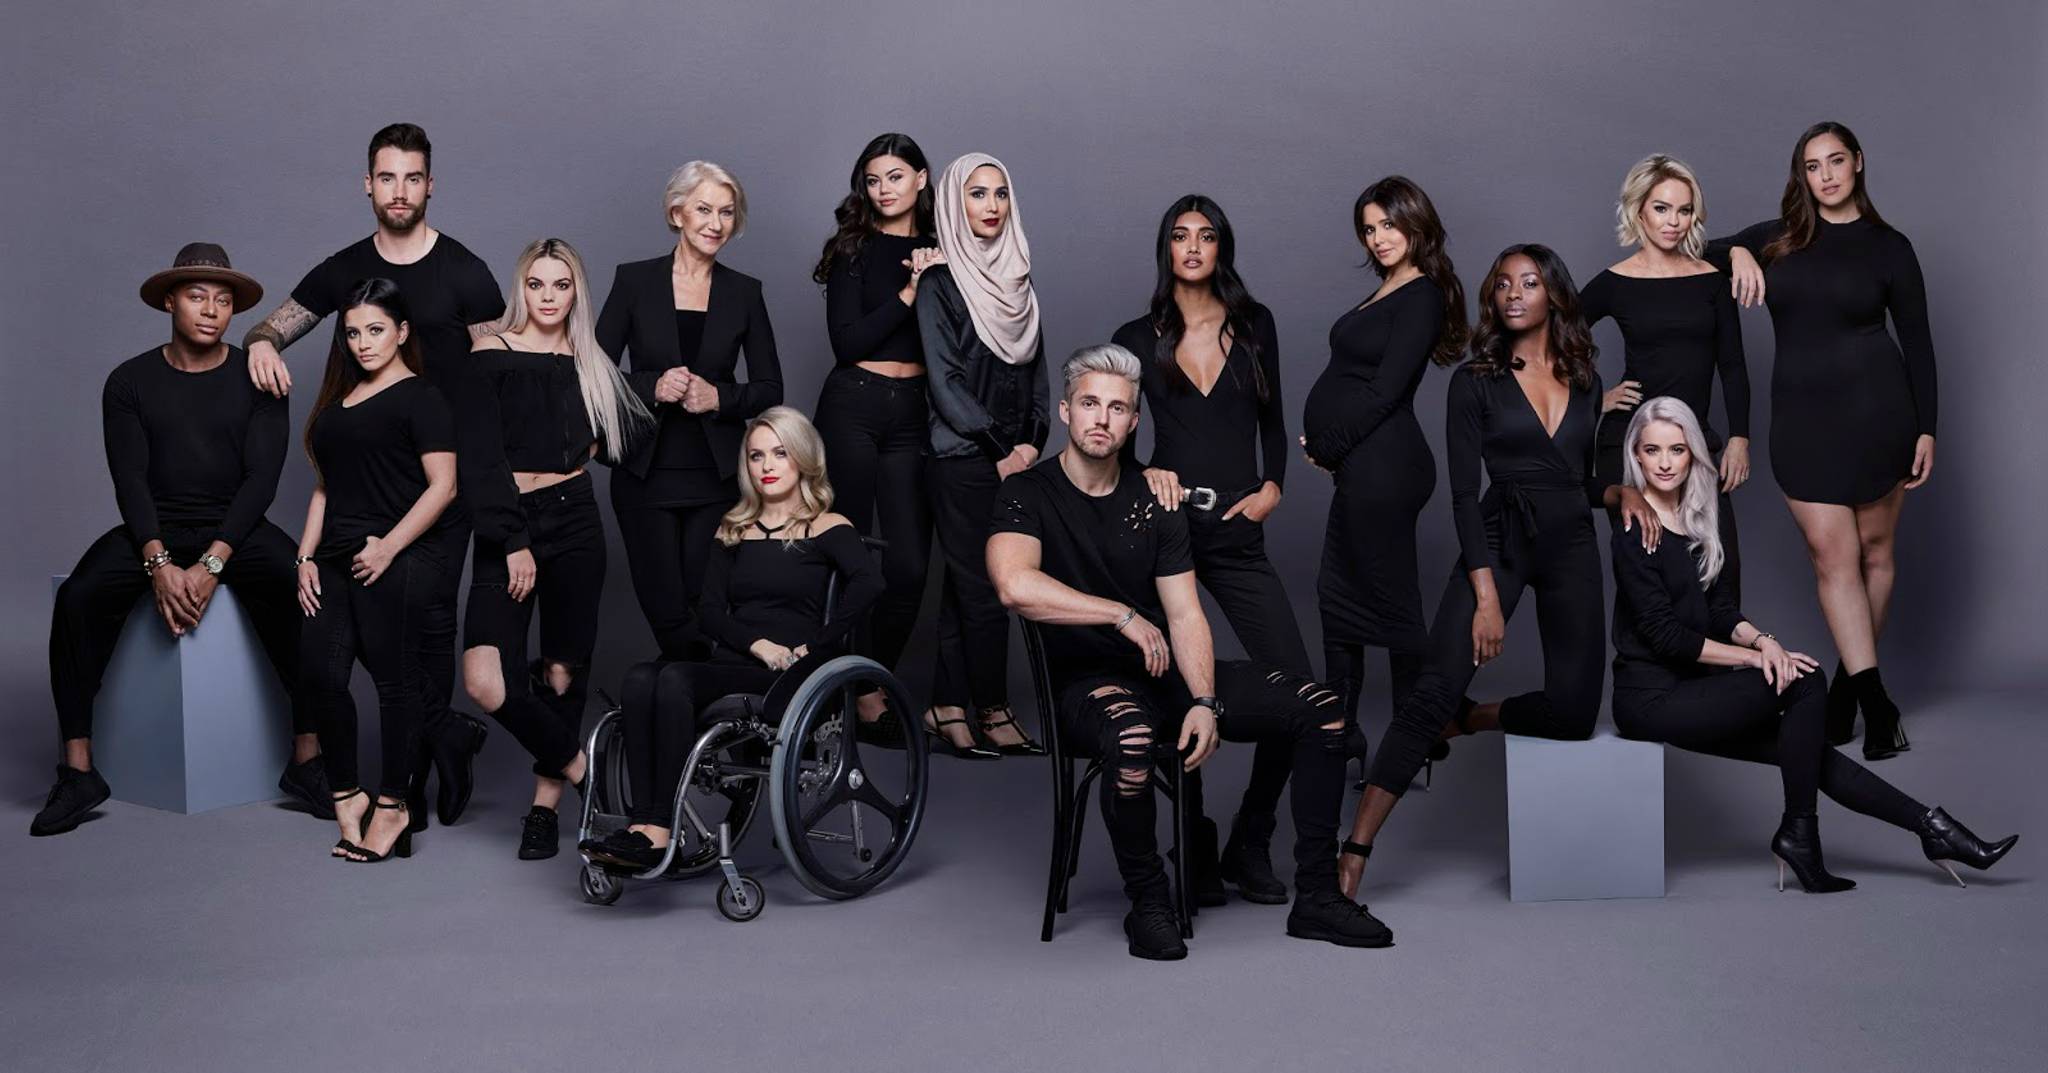 All Worth It: L’Oréal turns self-doubt into self-worth